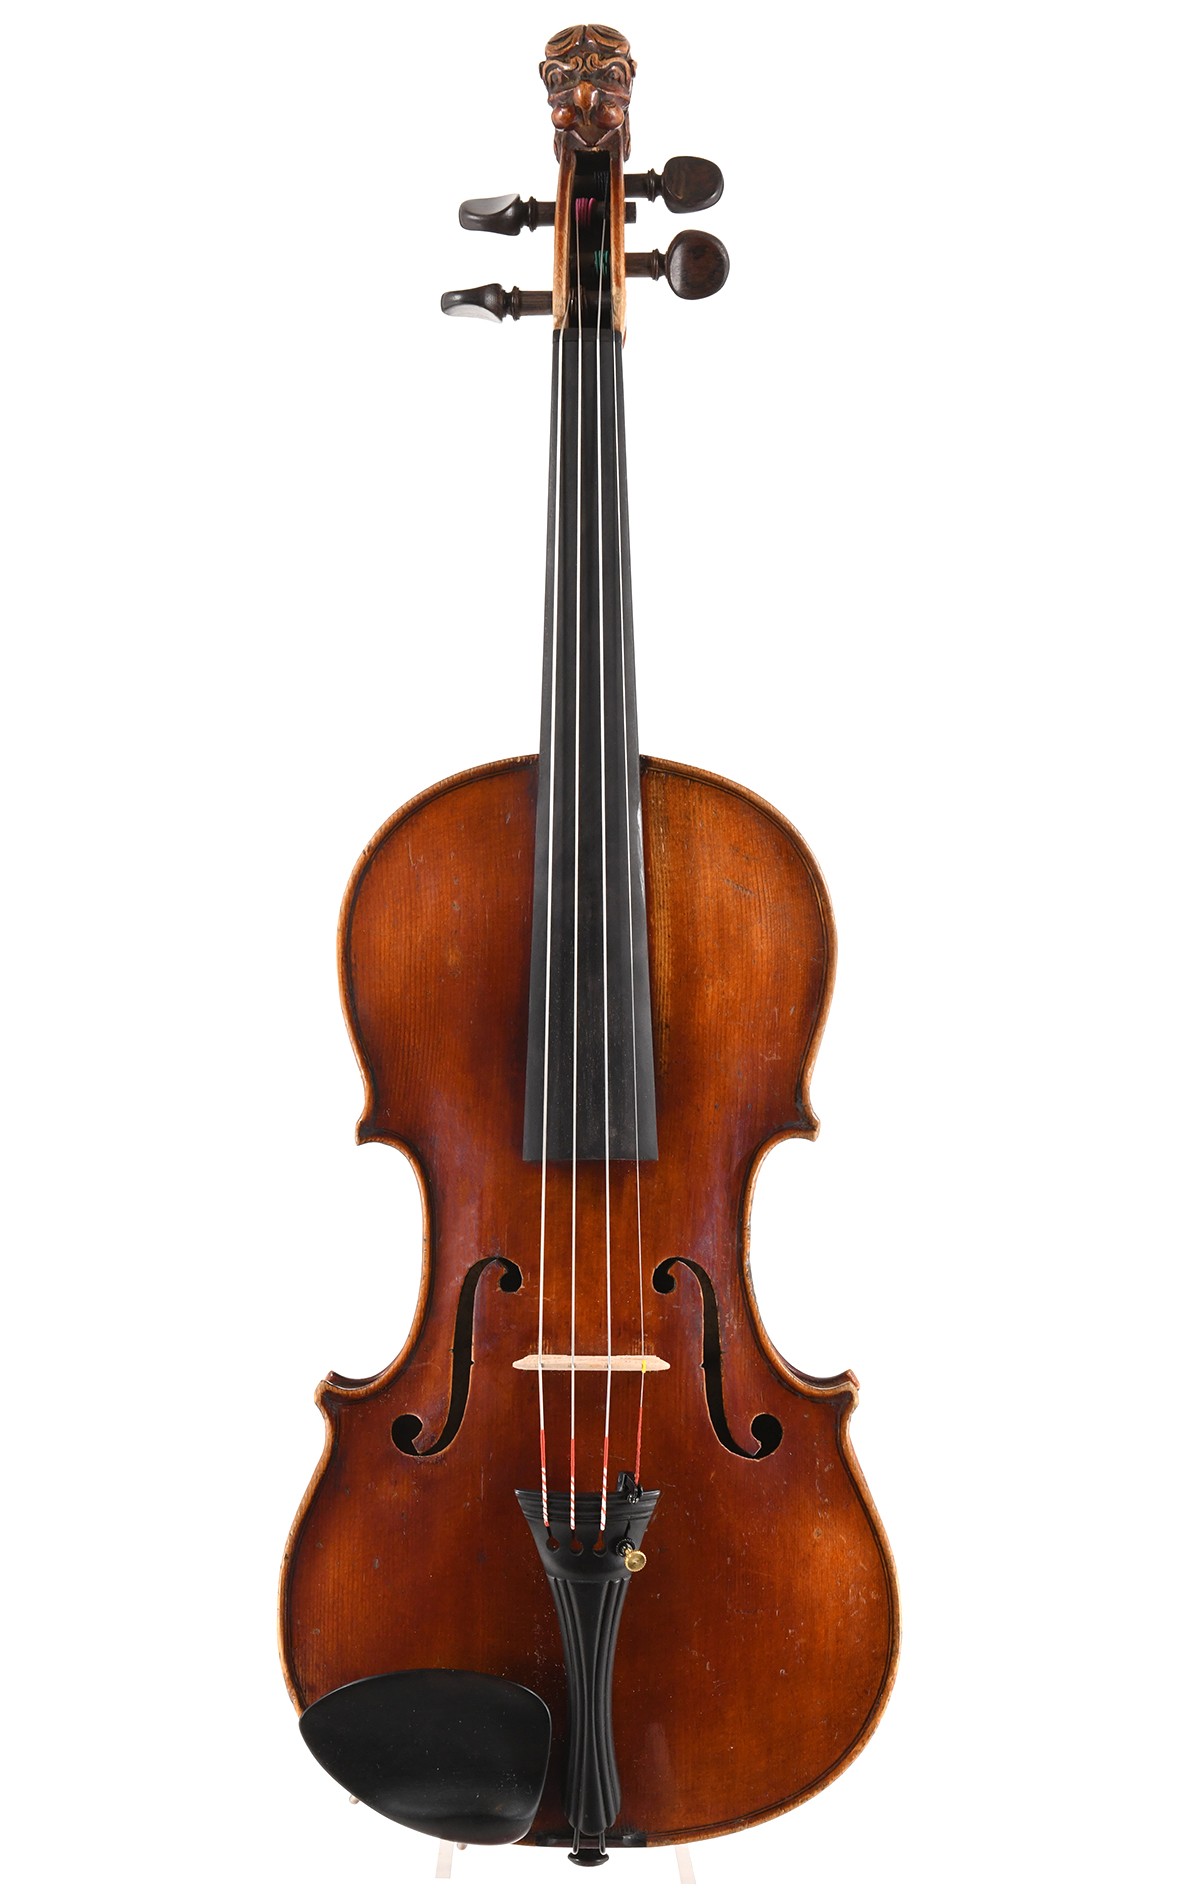 Lion's-head violin from Mittenwald, late 19th century